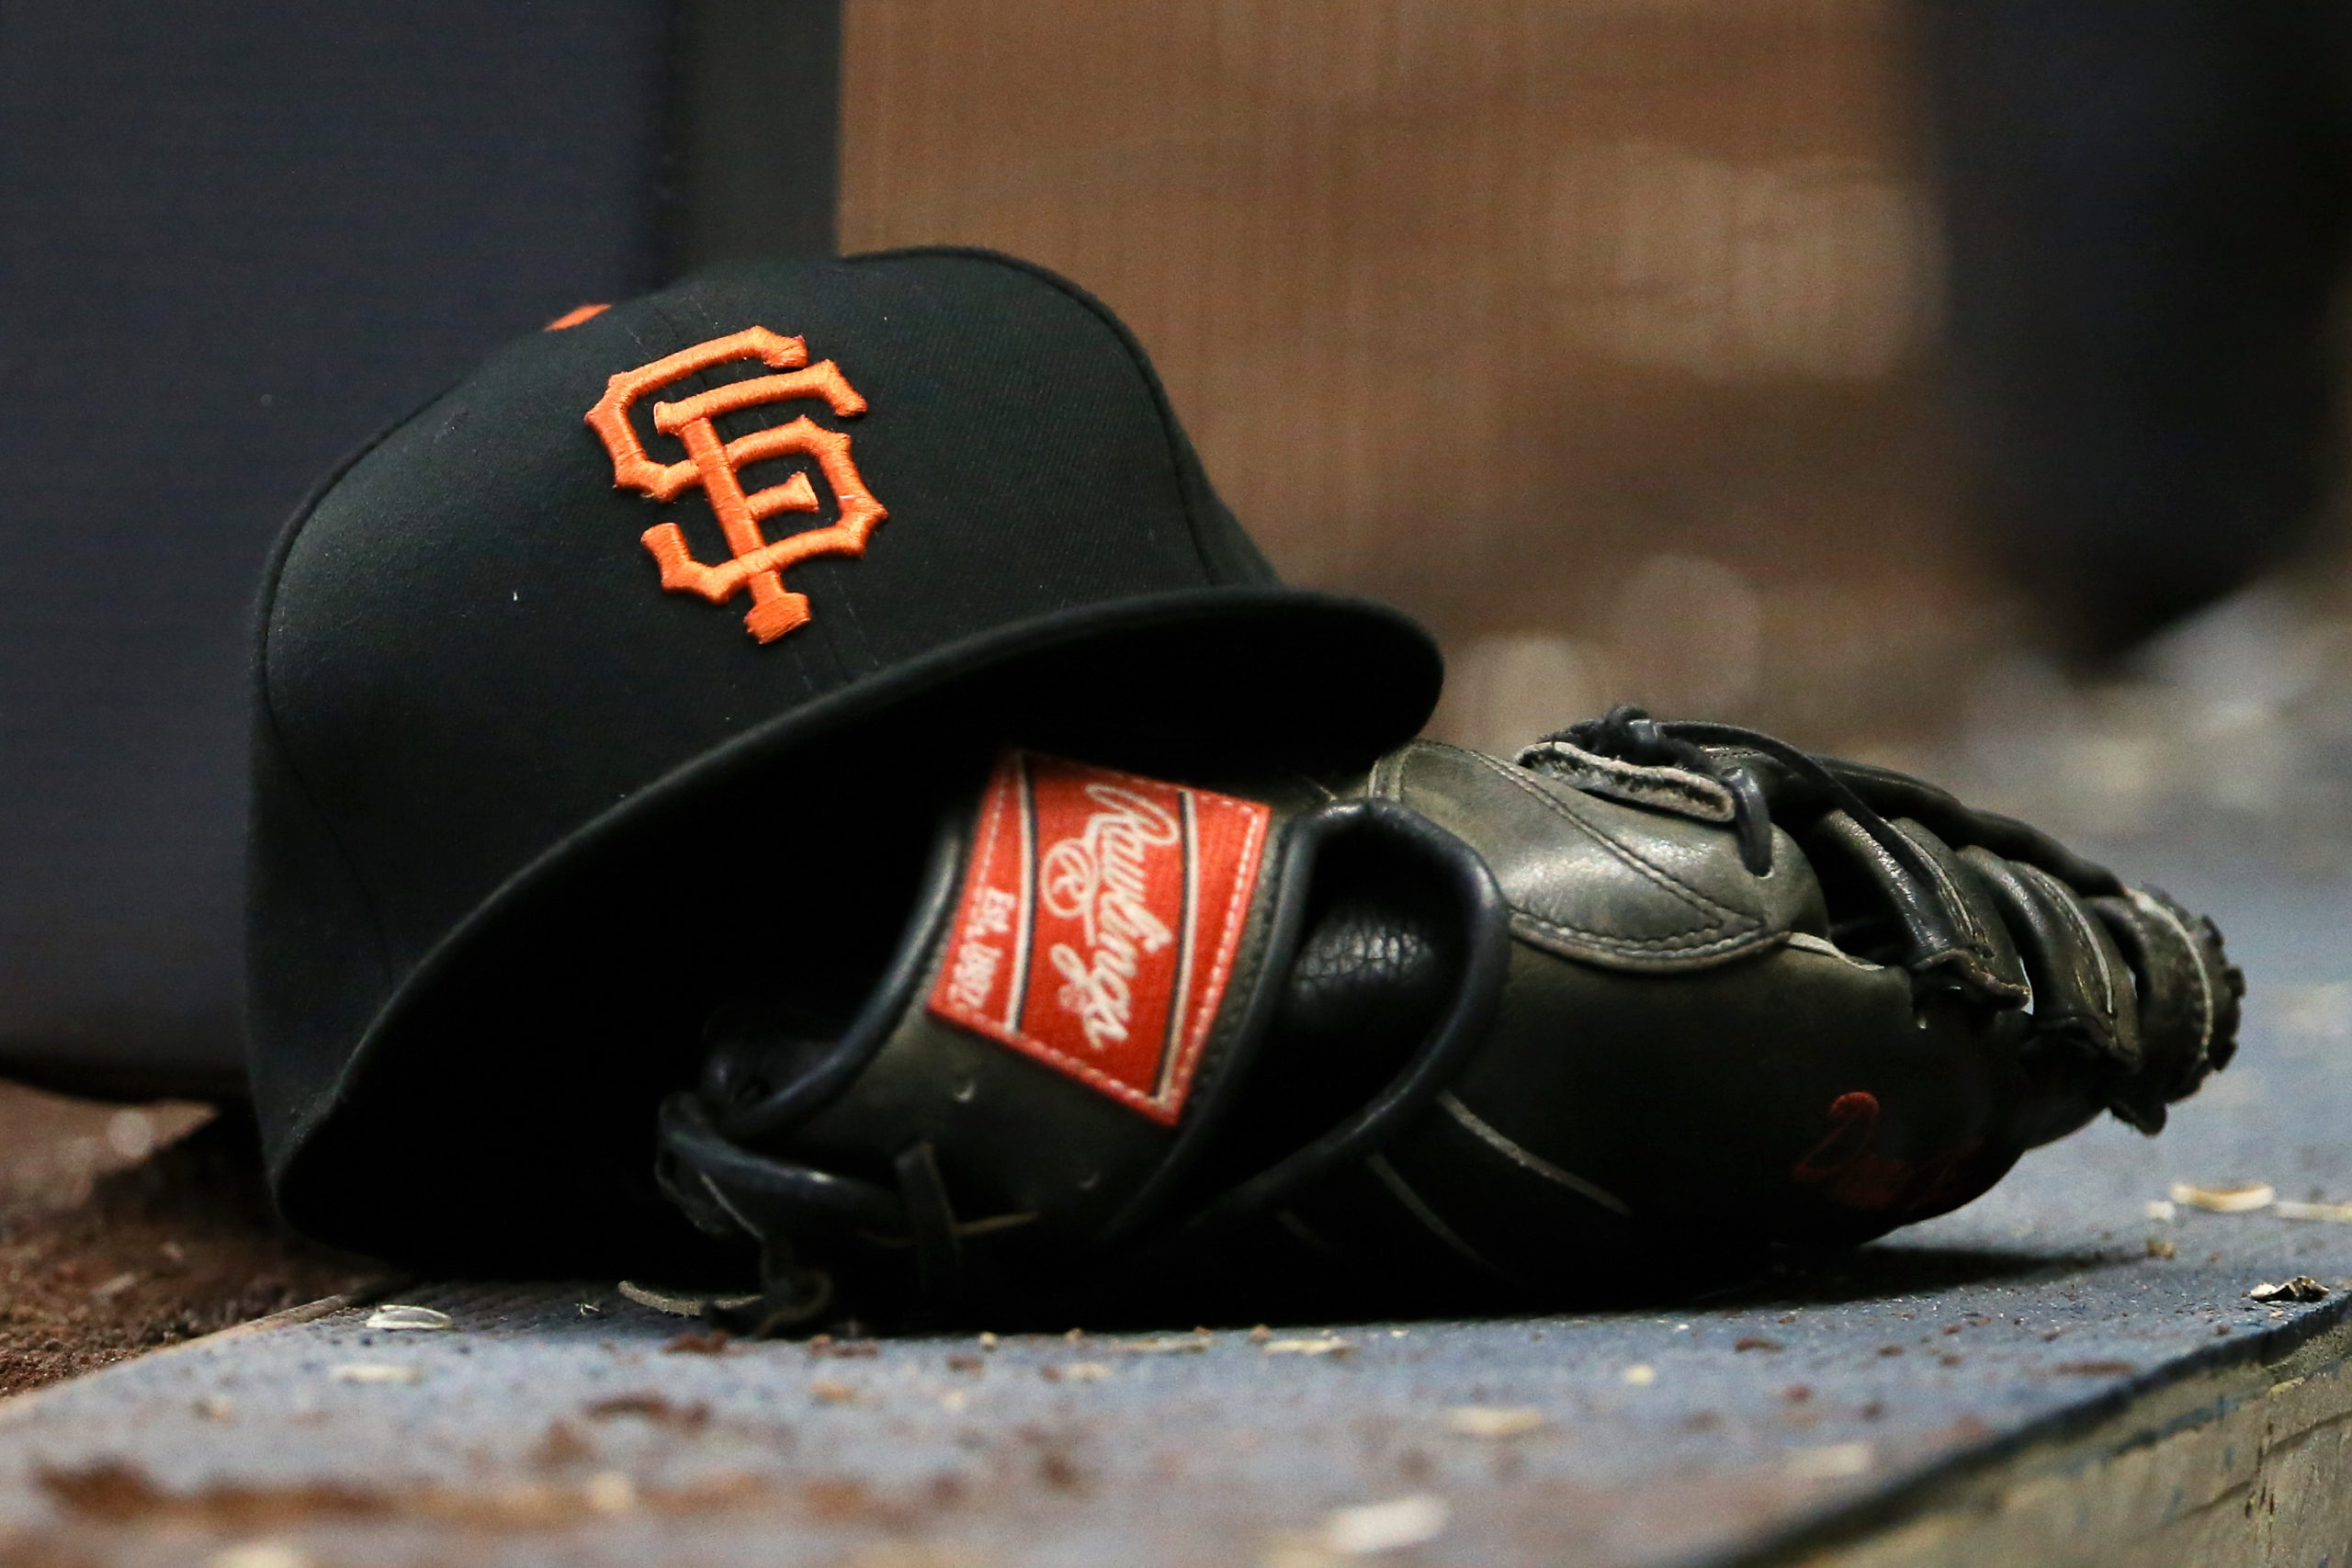 MILWAUKEE, WI - JUNE 05: A detail view of a San Francisco Giants hat and a Rawlings glove during th...